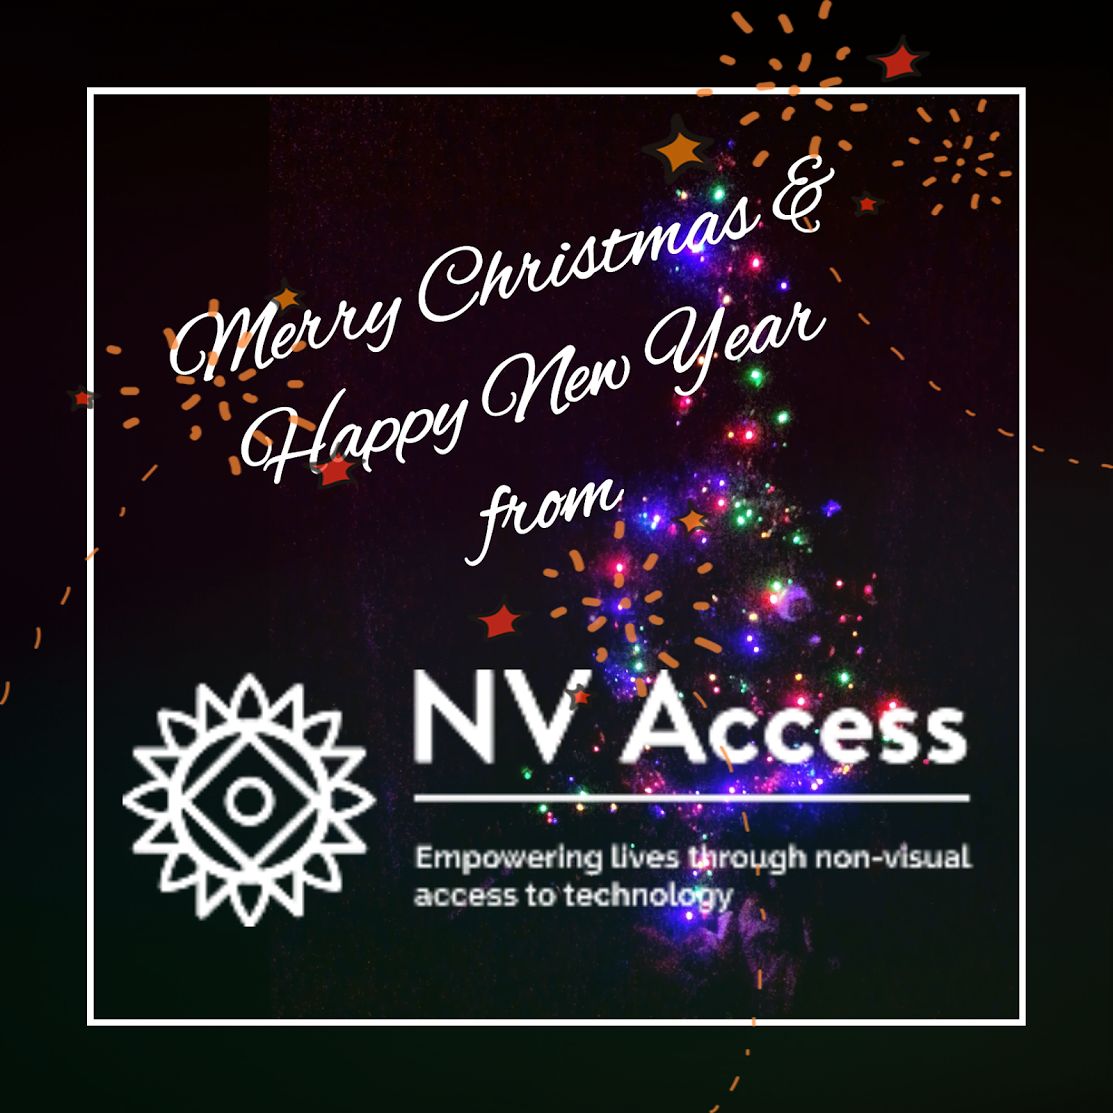 Merry Christmas & Happy New Year from NV Access (on black with Christmas lights)